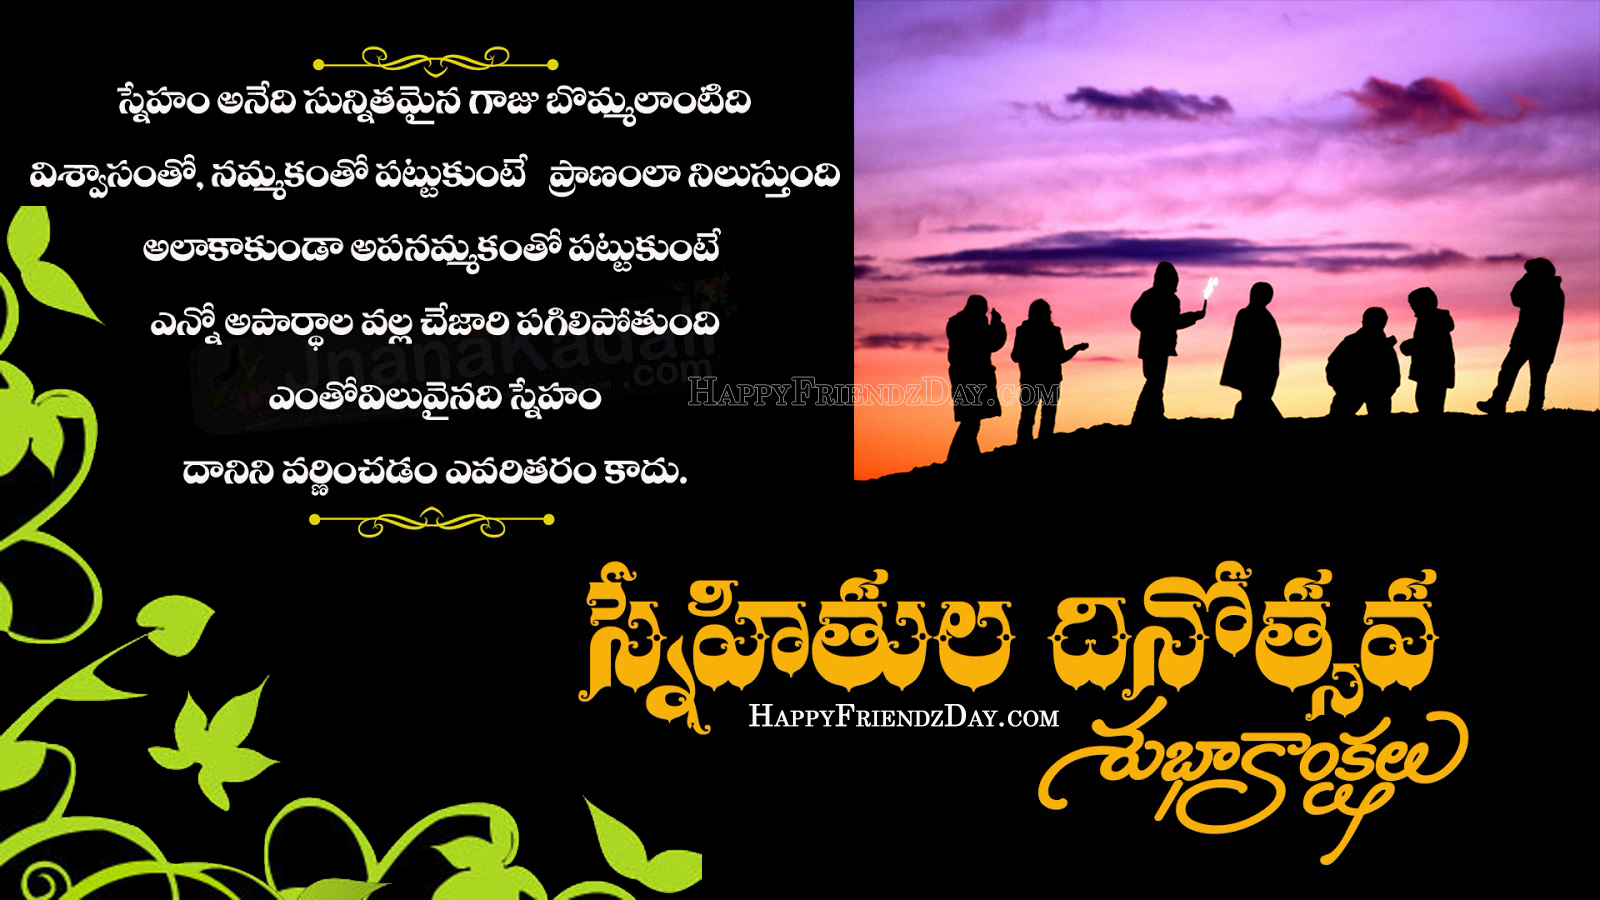 Friendship Day Wallpapers, Quotes, Messages, Cards - Friends Group Photo Hd - HD Wallpaper 